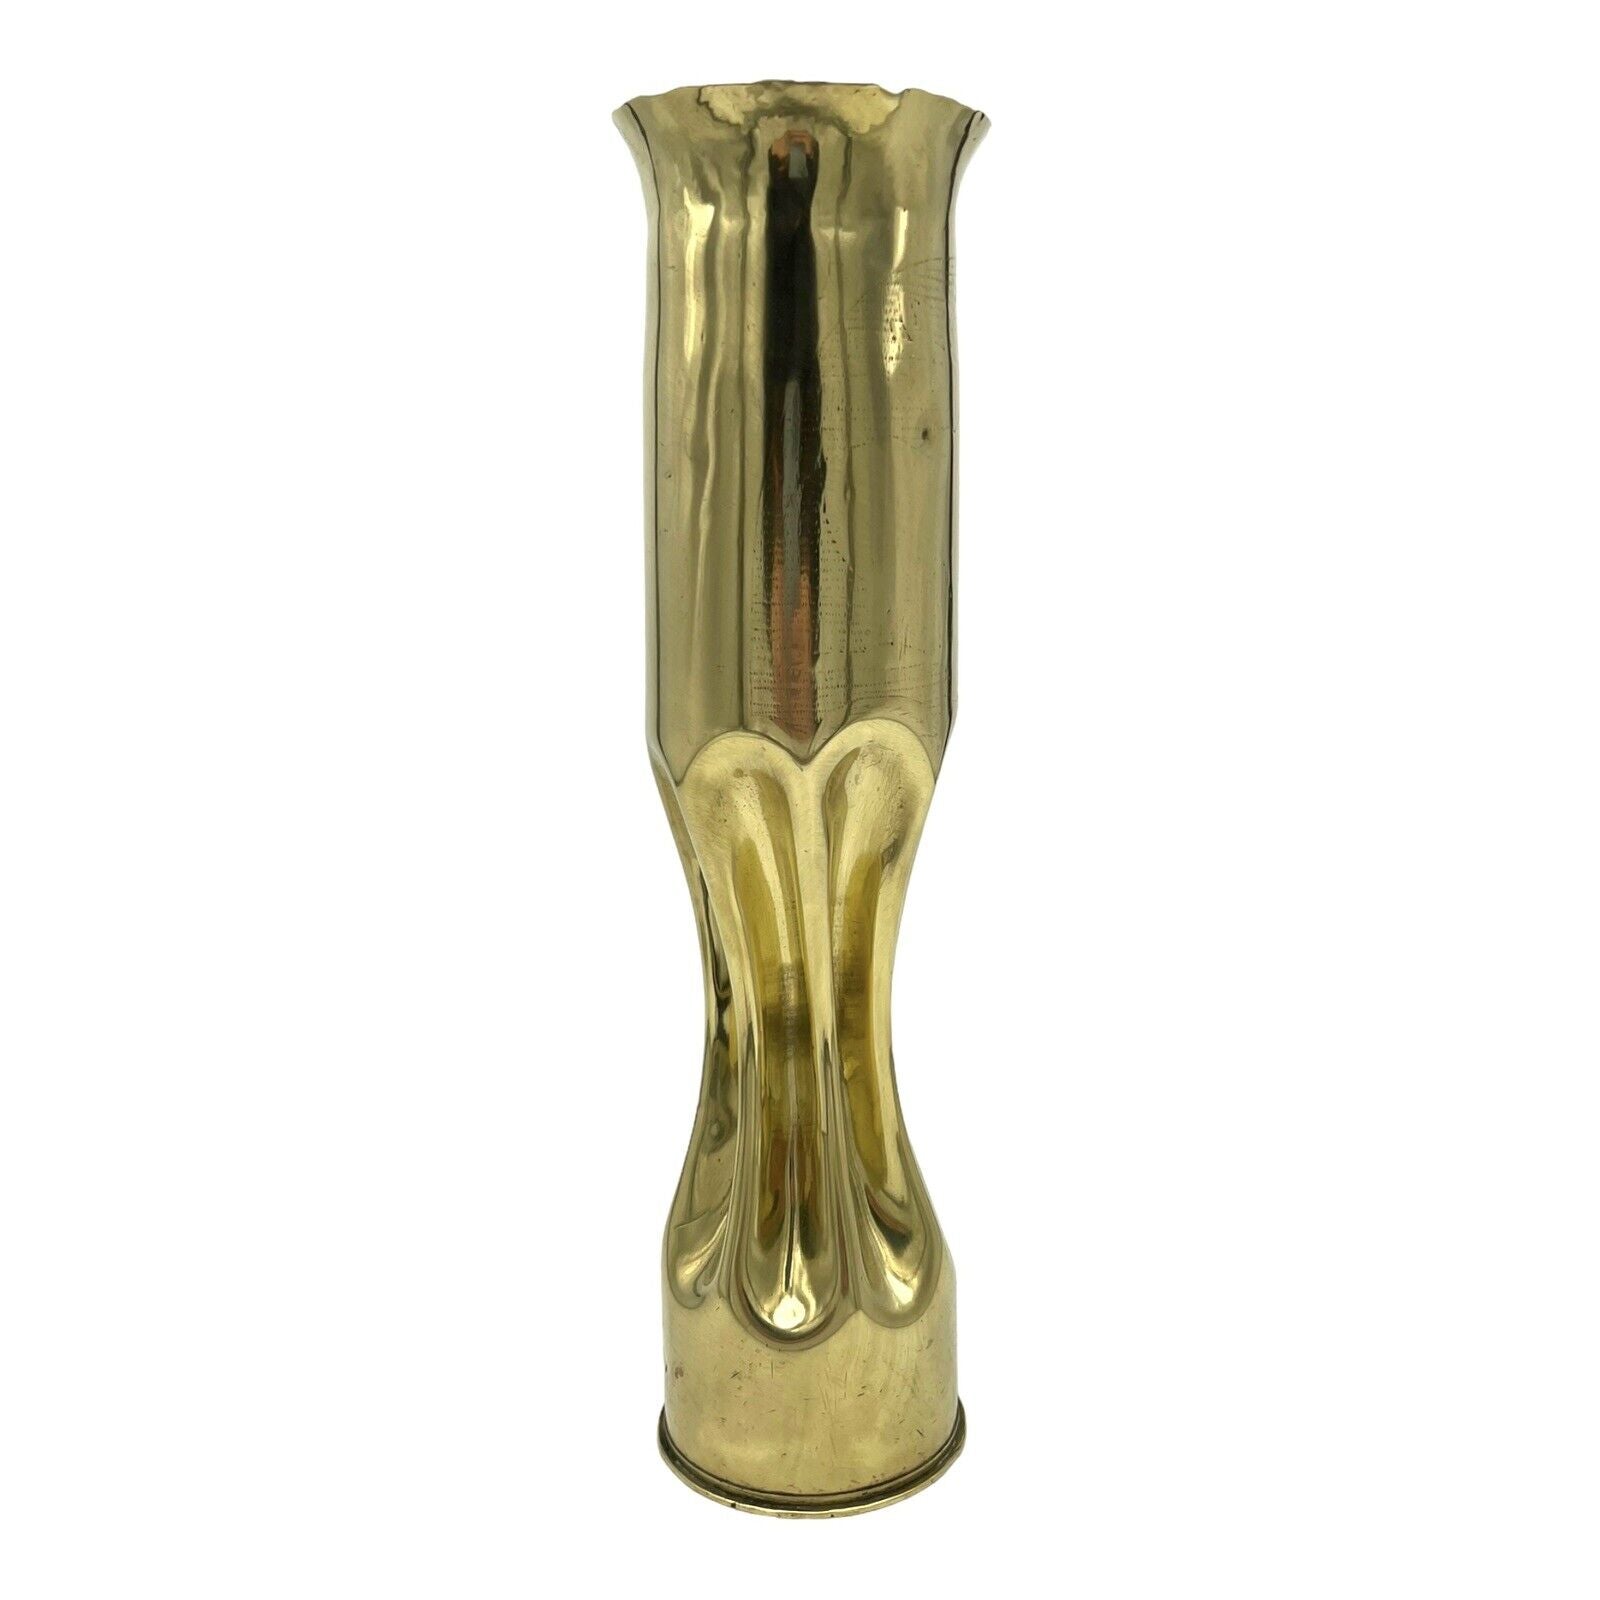 French WW1 brass shell case trench art vases sold by All Things French Store